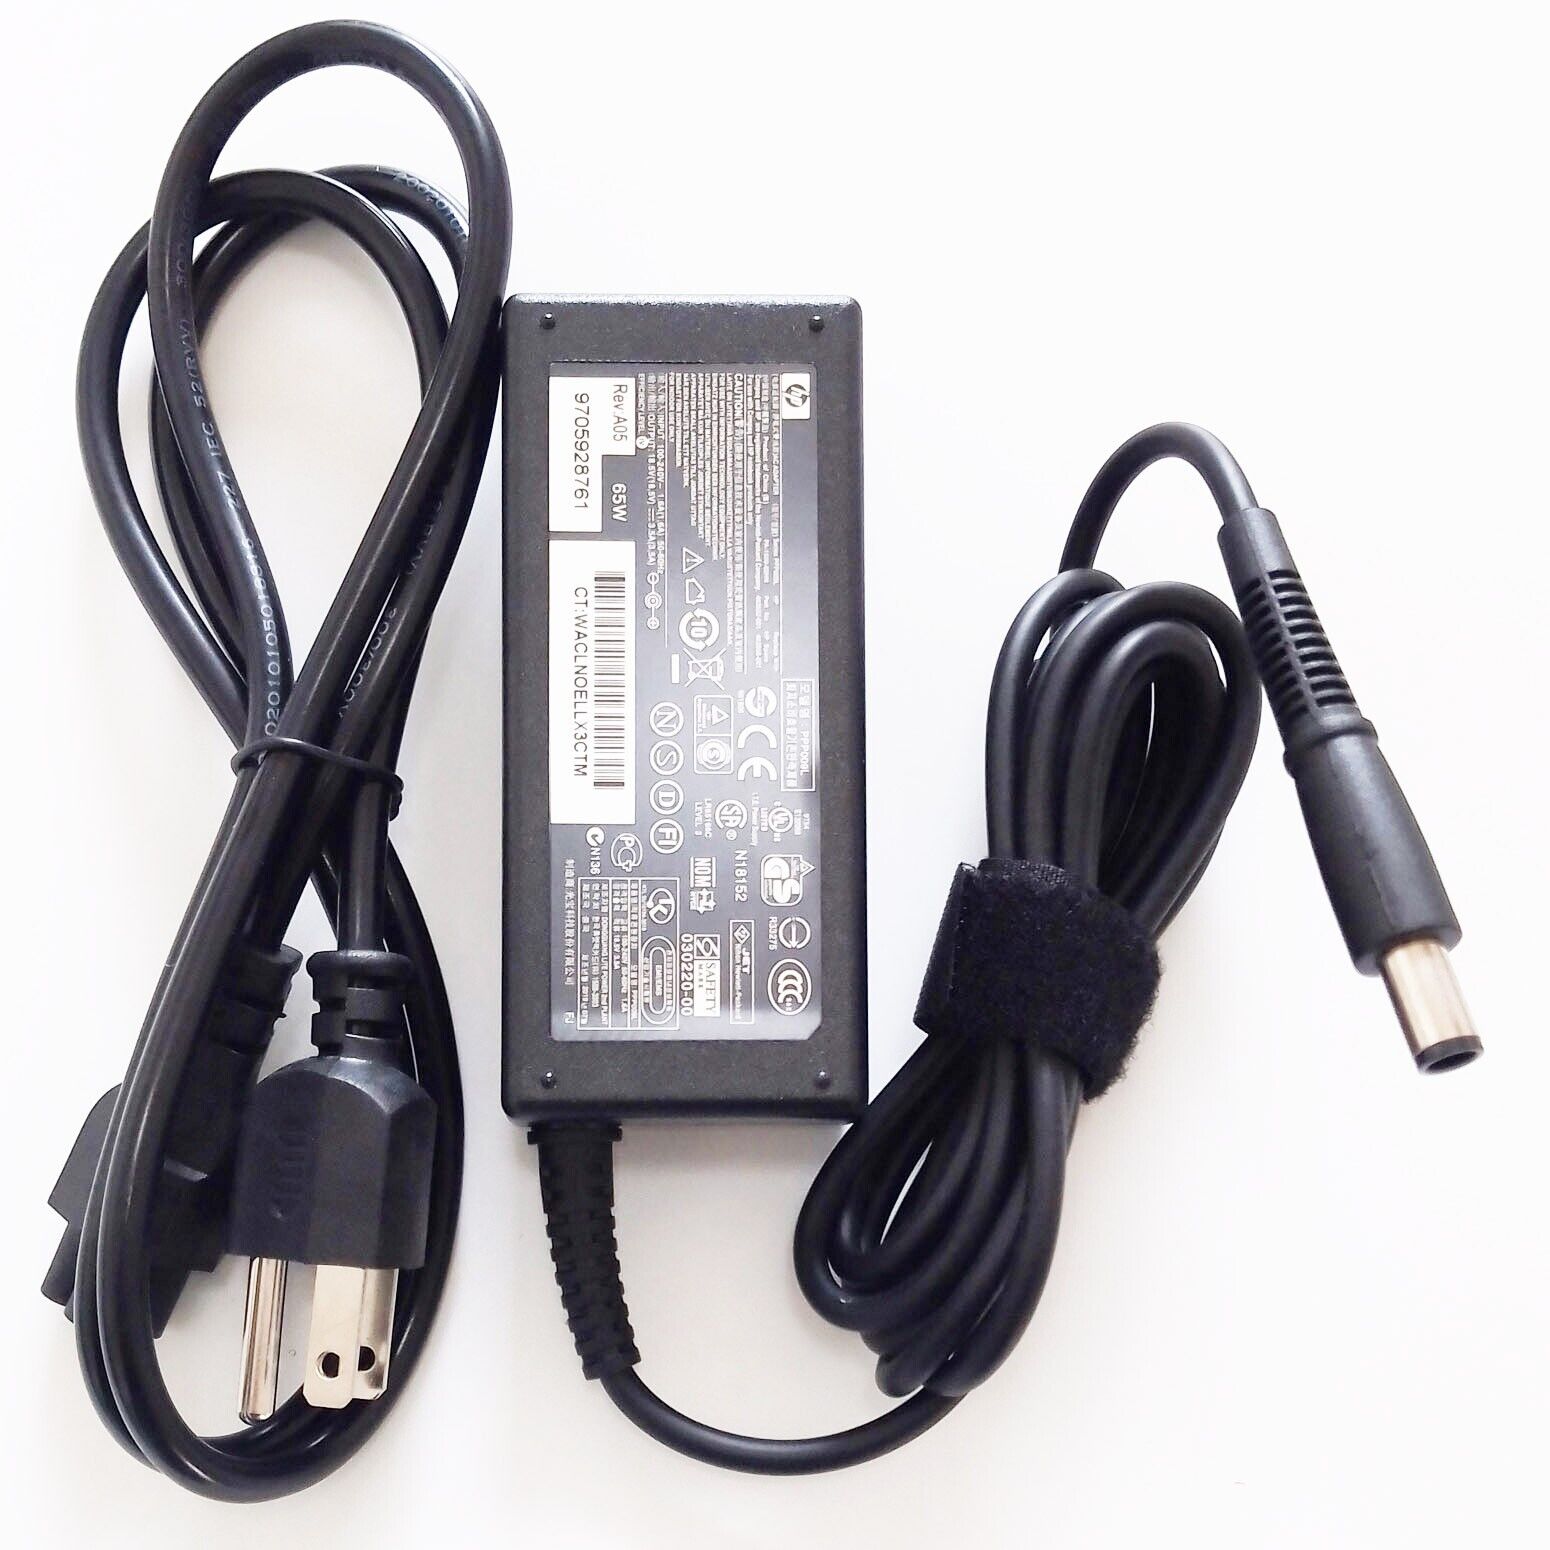 Genuine AC Adapter For HP/Compaq 463552-001 384019-003 463552-001 463958-001 65w